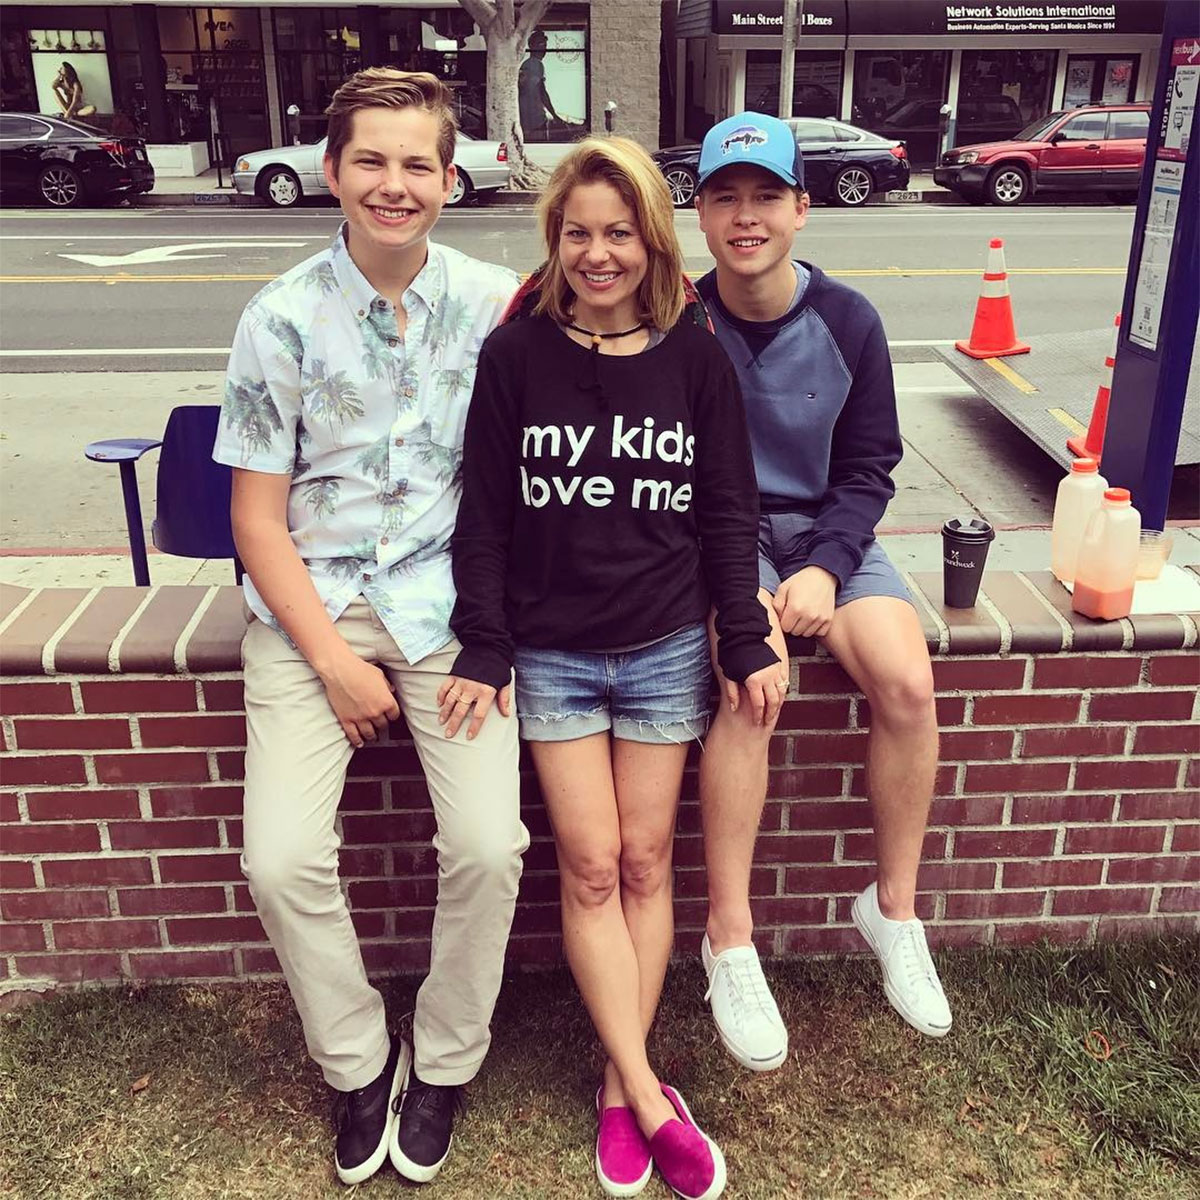 Candace Cameron Bure's Kids — See Her 3 Kids and Their Father - Parade